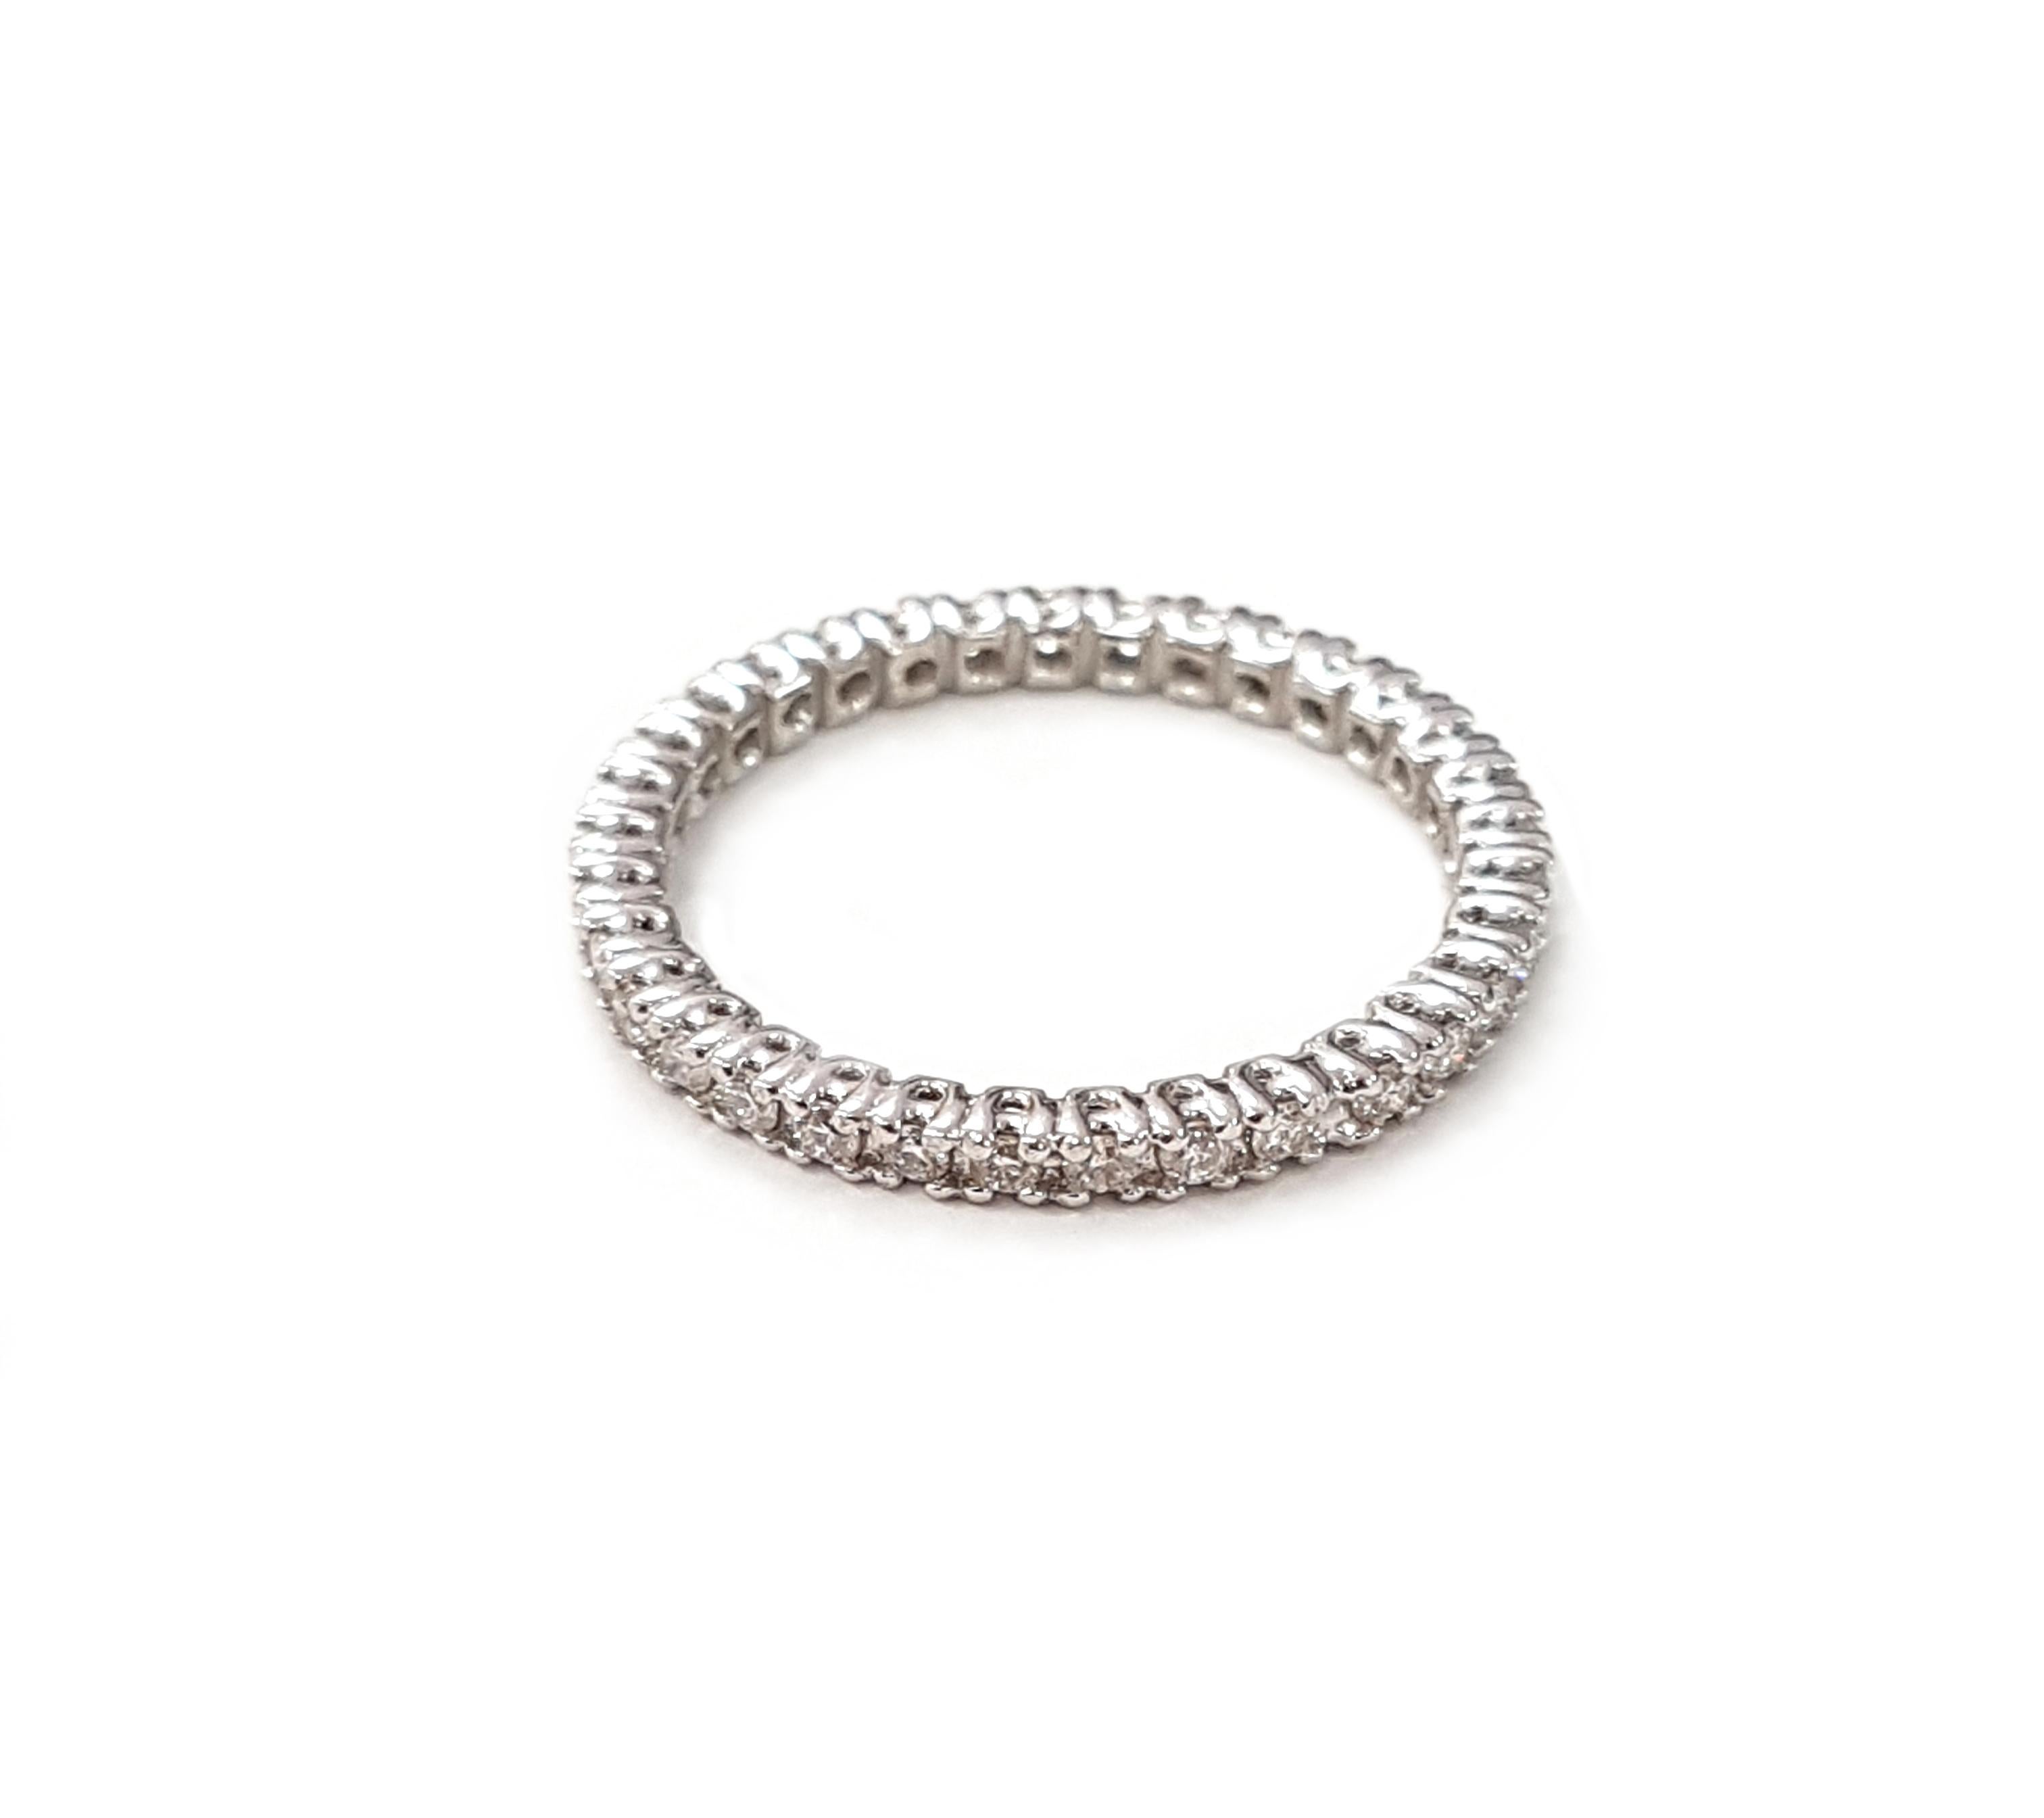 An 18-karat white gold and diamond eternity ring with round-cut, white diamonds. A sleek and understated style that will last a lifetime, this ring adds serious sparkle to your stack or sits beautifully on its own. 

This ring is also available with